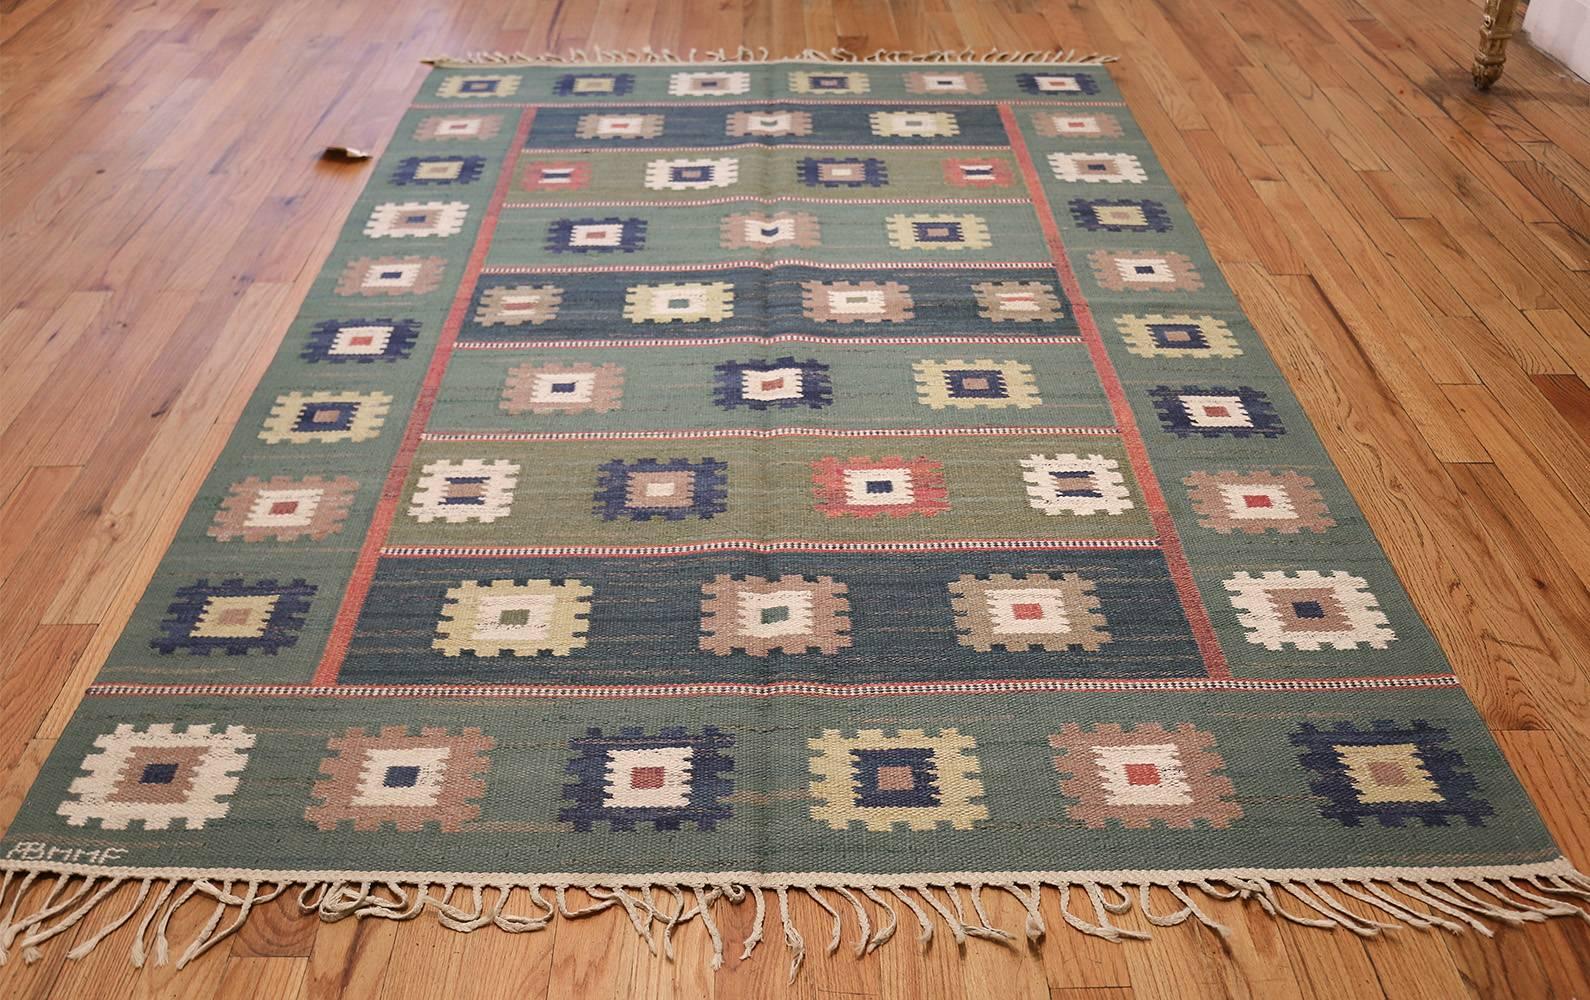 Hand-Woven Vintage Swedish Carpet by Marta Maas-Fjetterström. Size: 5 ft 7 in x 8 ft 4 in